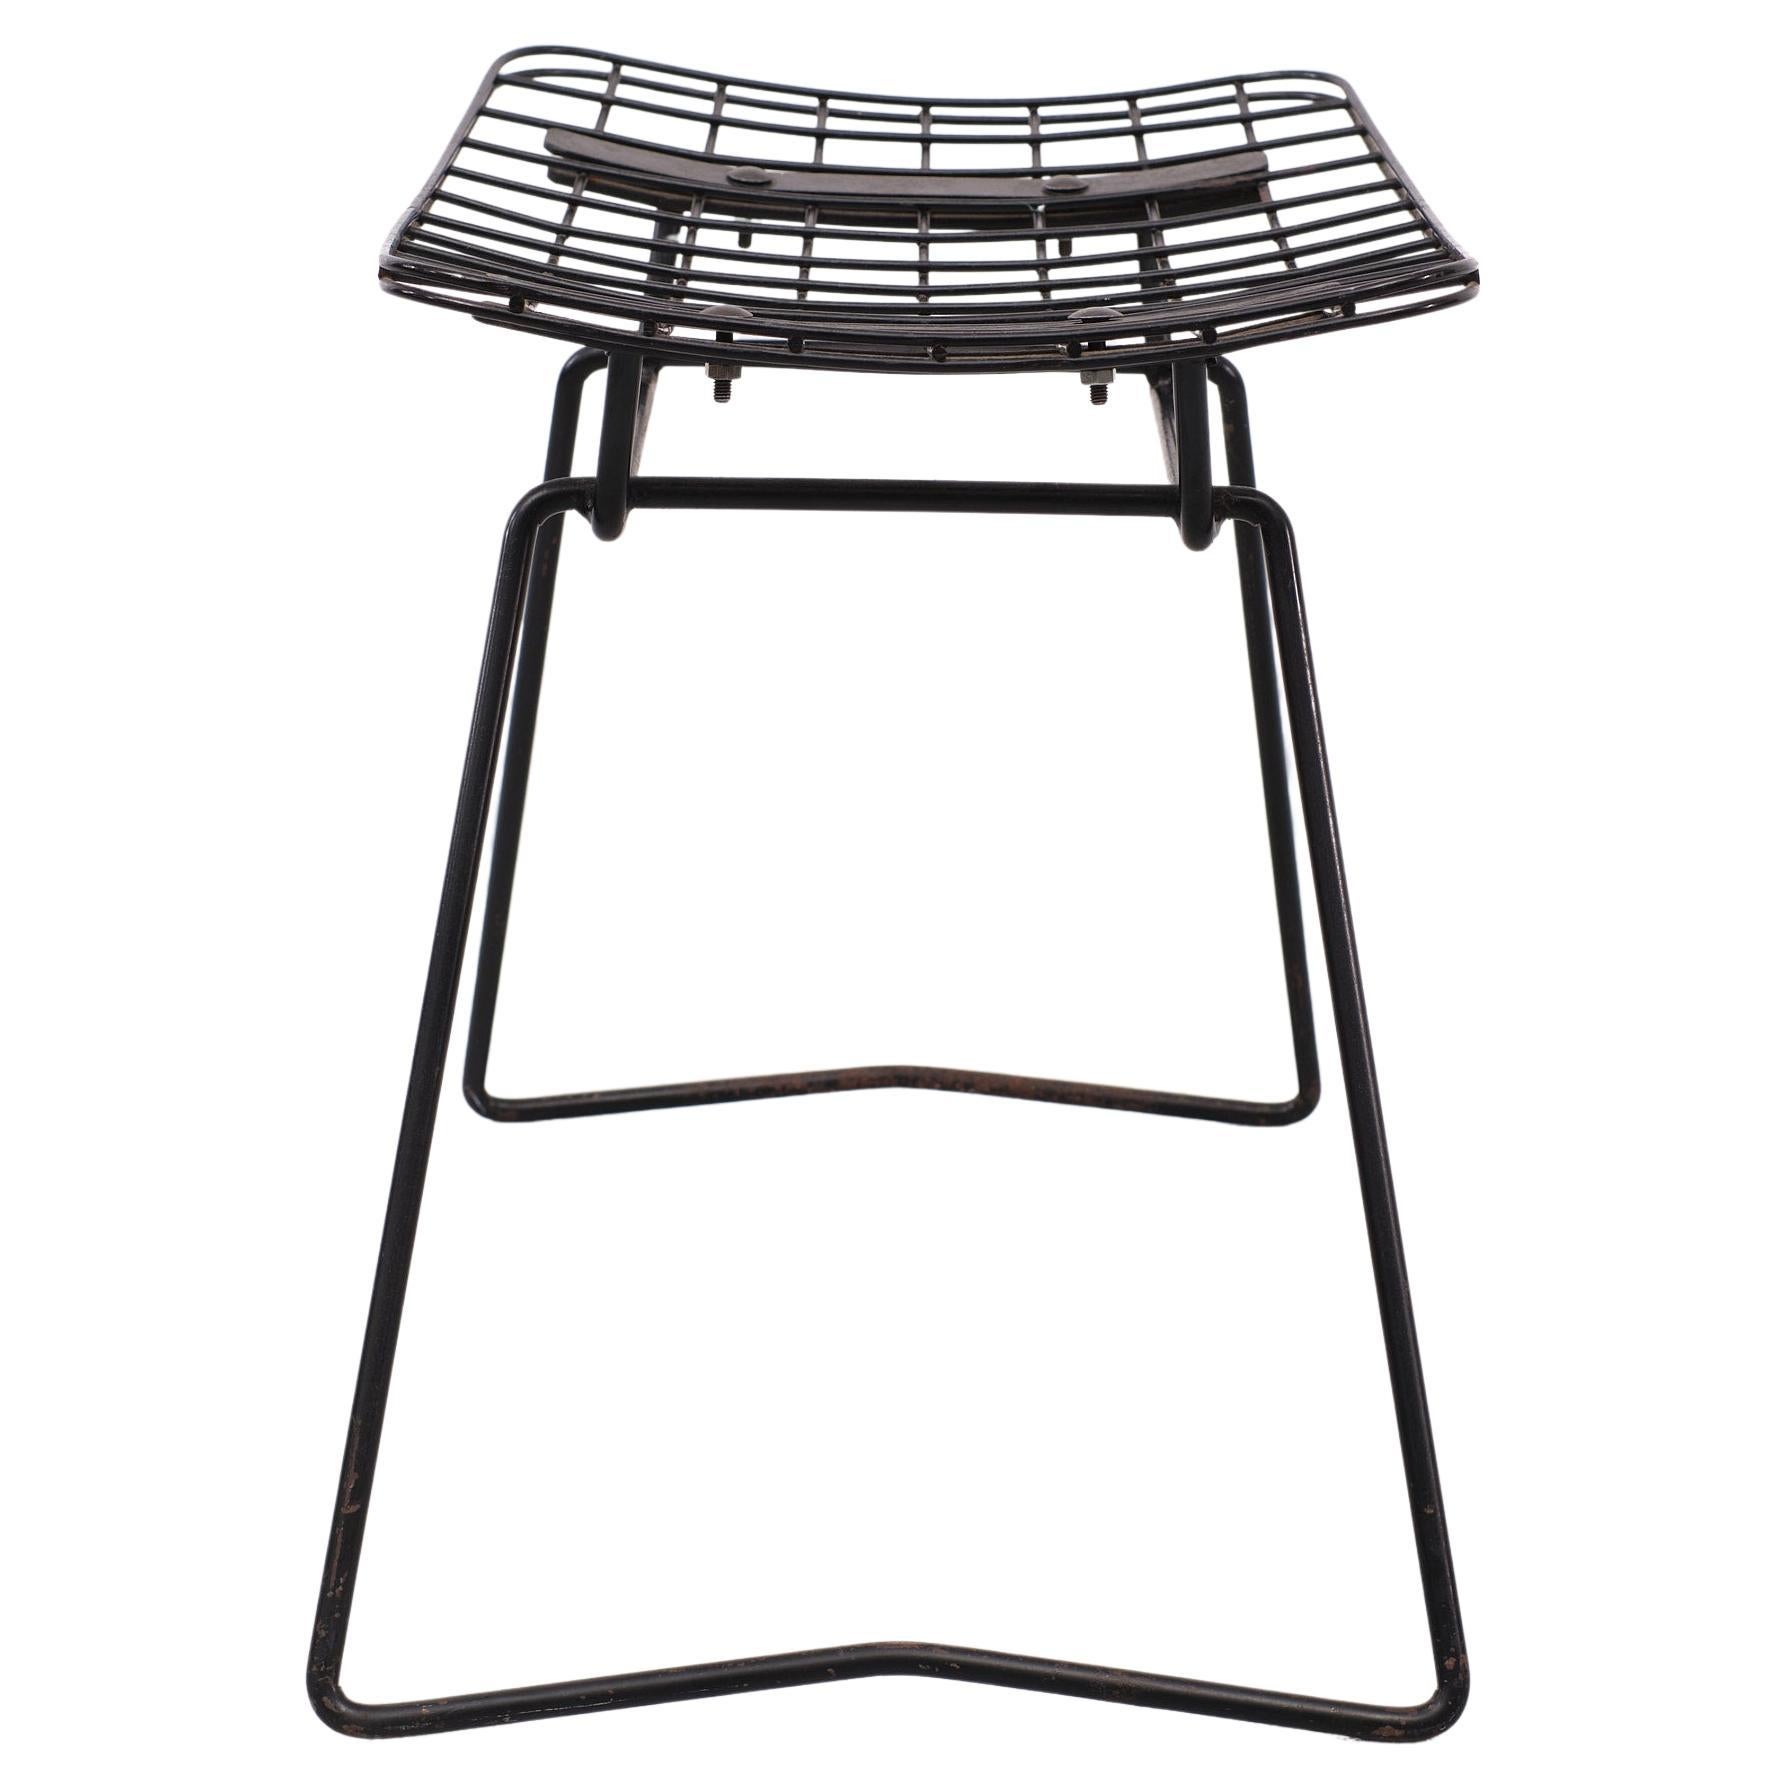 Steel Wire Stool Cees Braakman for Pastoe, 1958 In Good Condition For Sale In Den Haag, NL